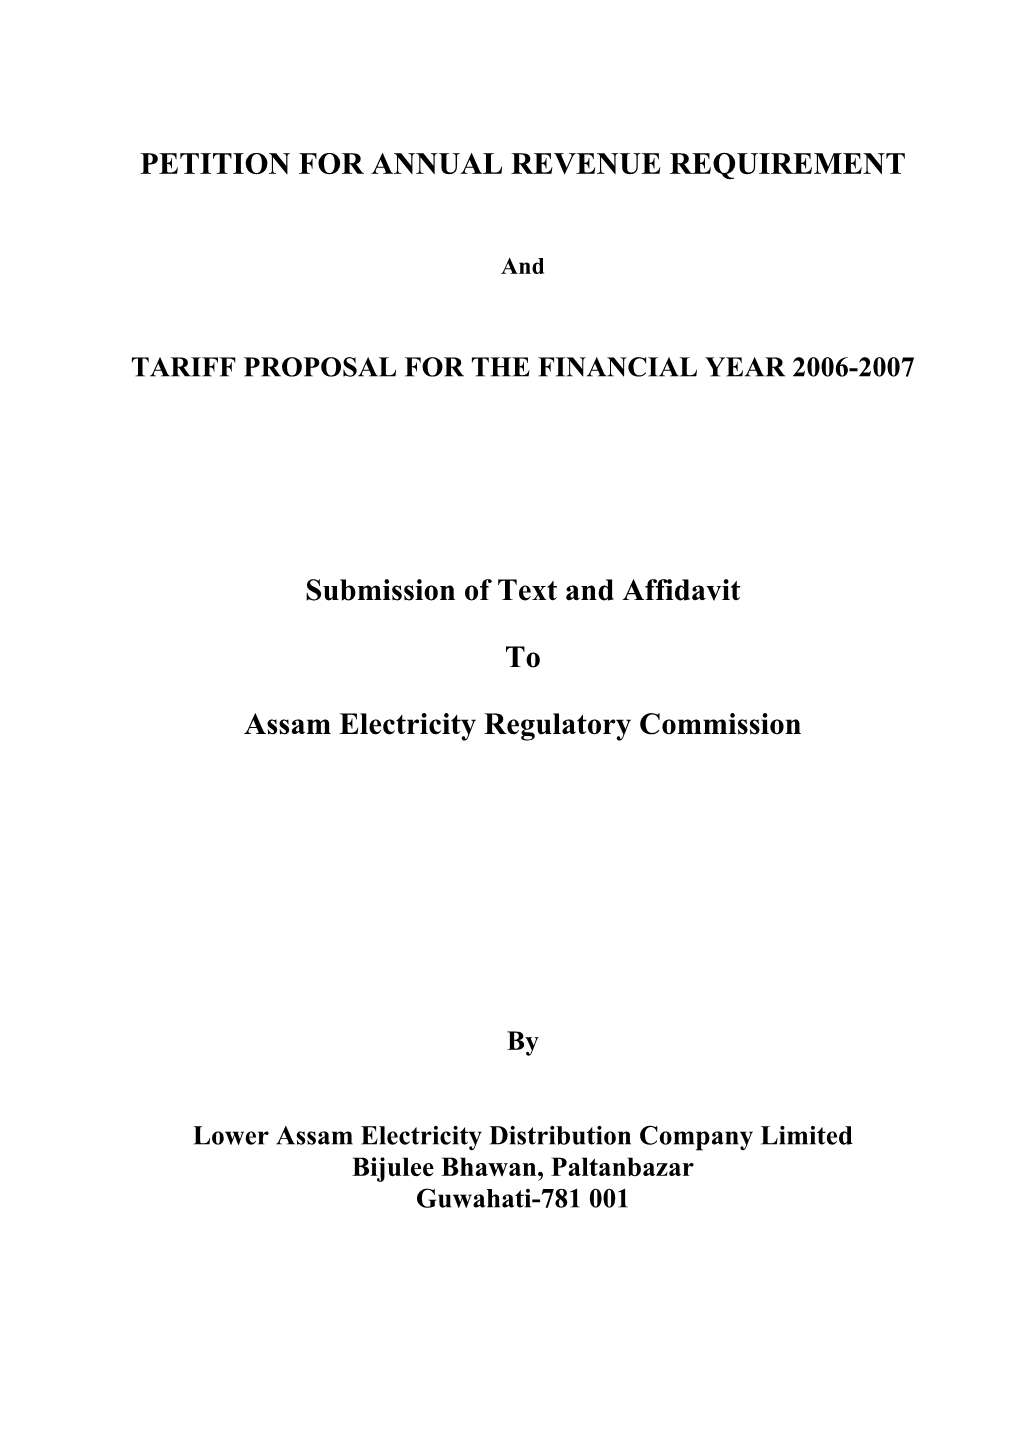 Lower Assam Electricity Distribution Company Limited (LAEDCL)